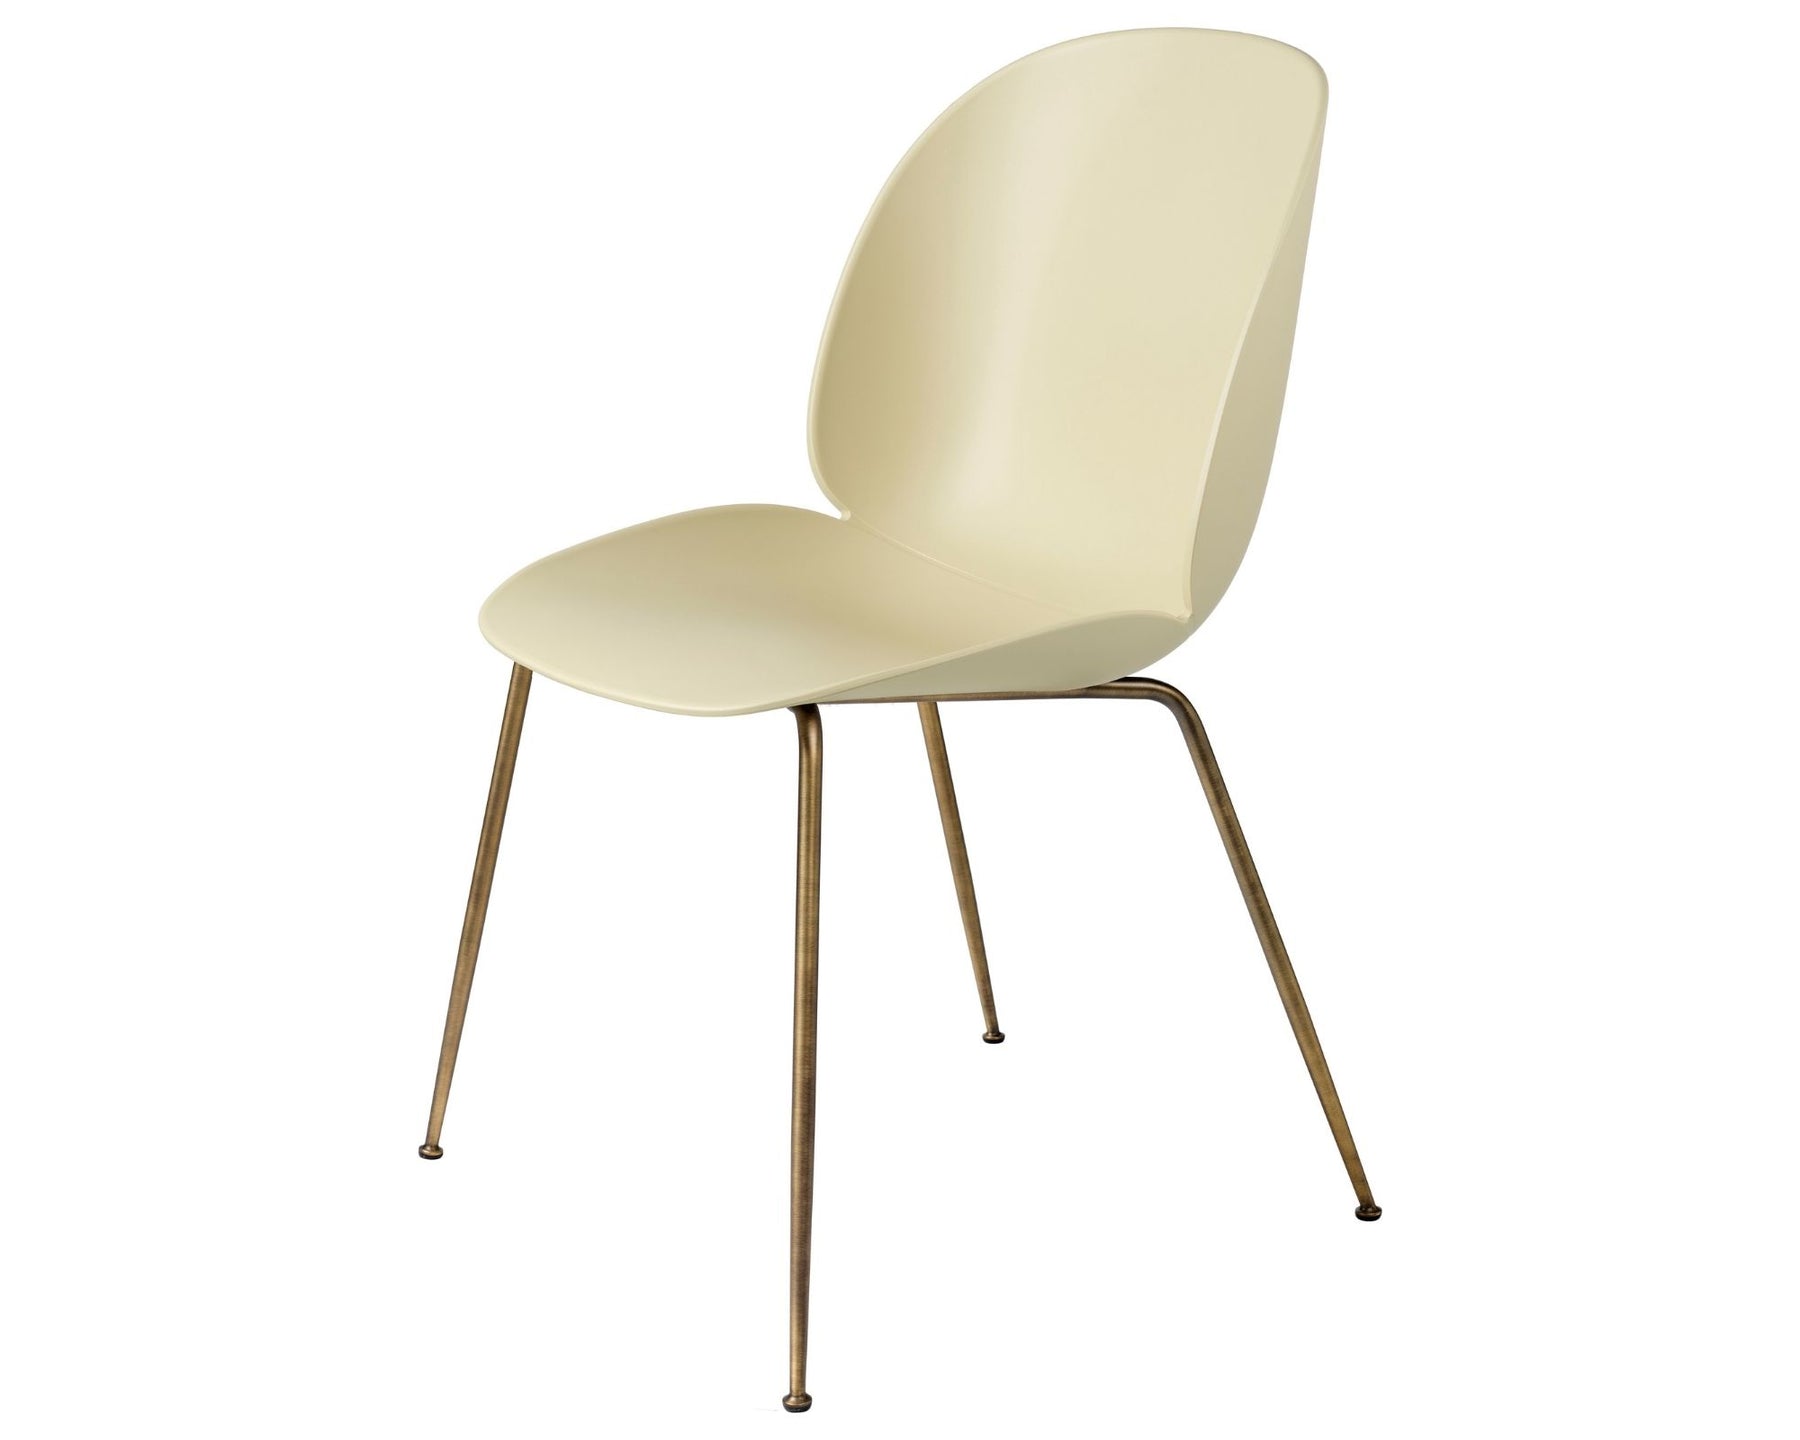 Pastel Green Dining Chair with Antique Brass Base | DSHOP